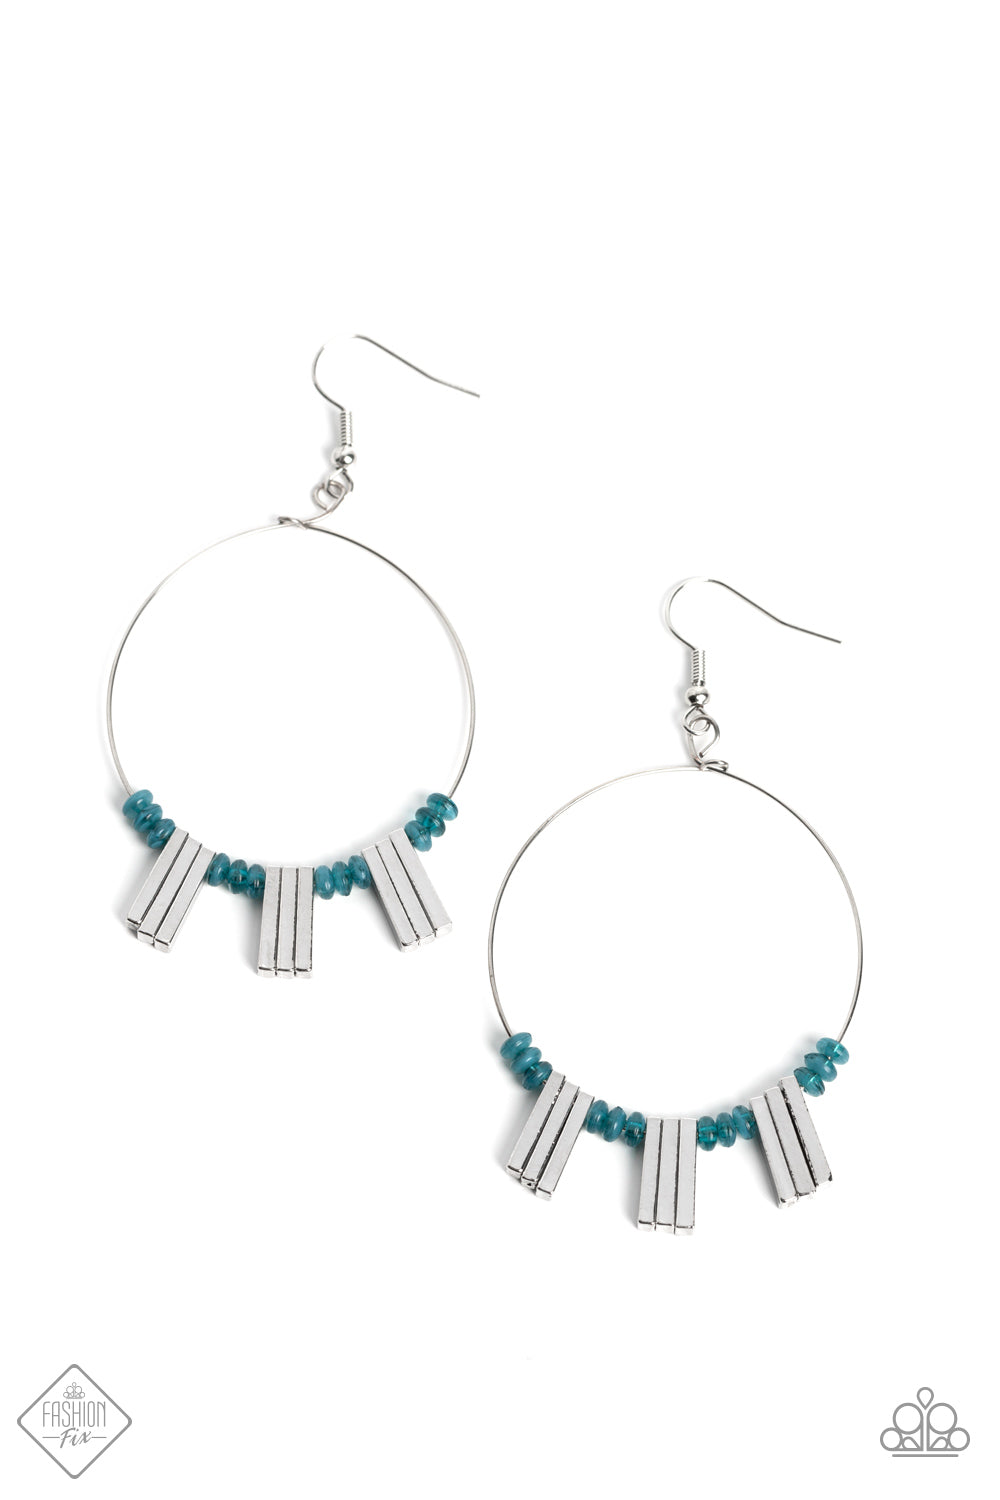 Luxe Lagoon - Blue and Silver Earrings - Paparazzi Accessories - Tiny Harbor Blue beads are threaded along the bottom edge of a skinny silver hoop. The beads are separated by sections of rectangular silver bars that accentuate the curvature of the hoop, resulting in a flared design that demands attention. Earring attaches to a standard fishhook fitting. Sold as one pair of earrings.